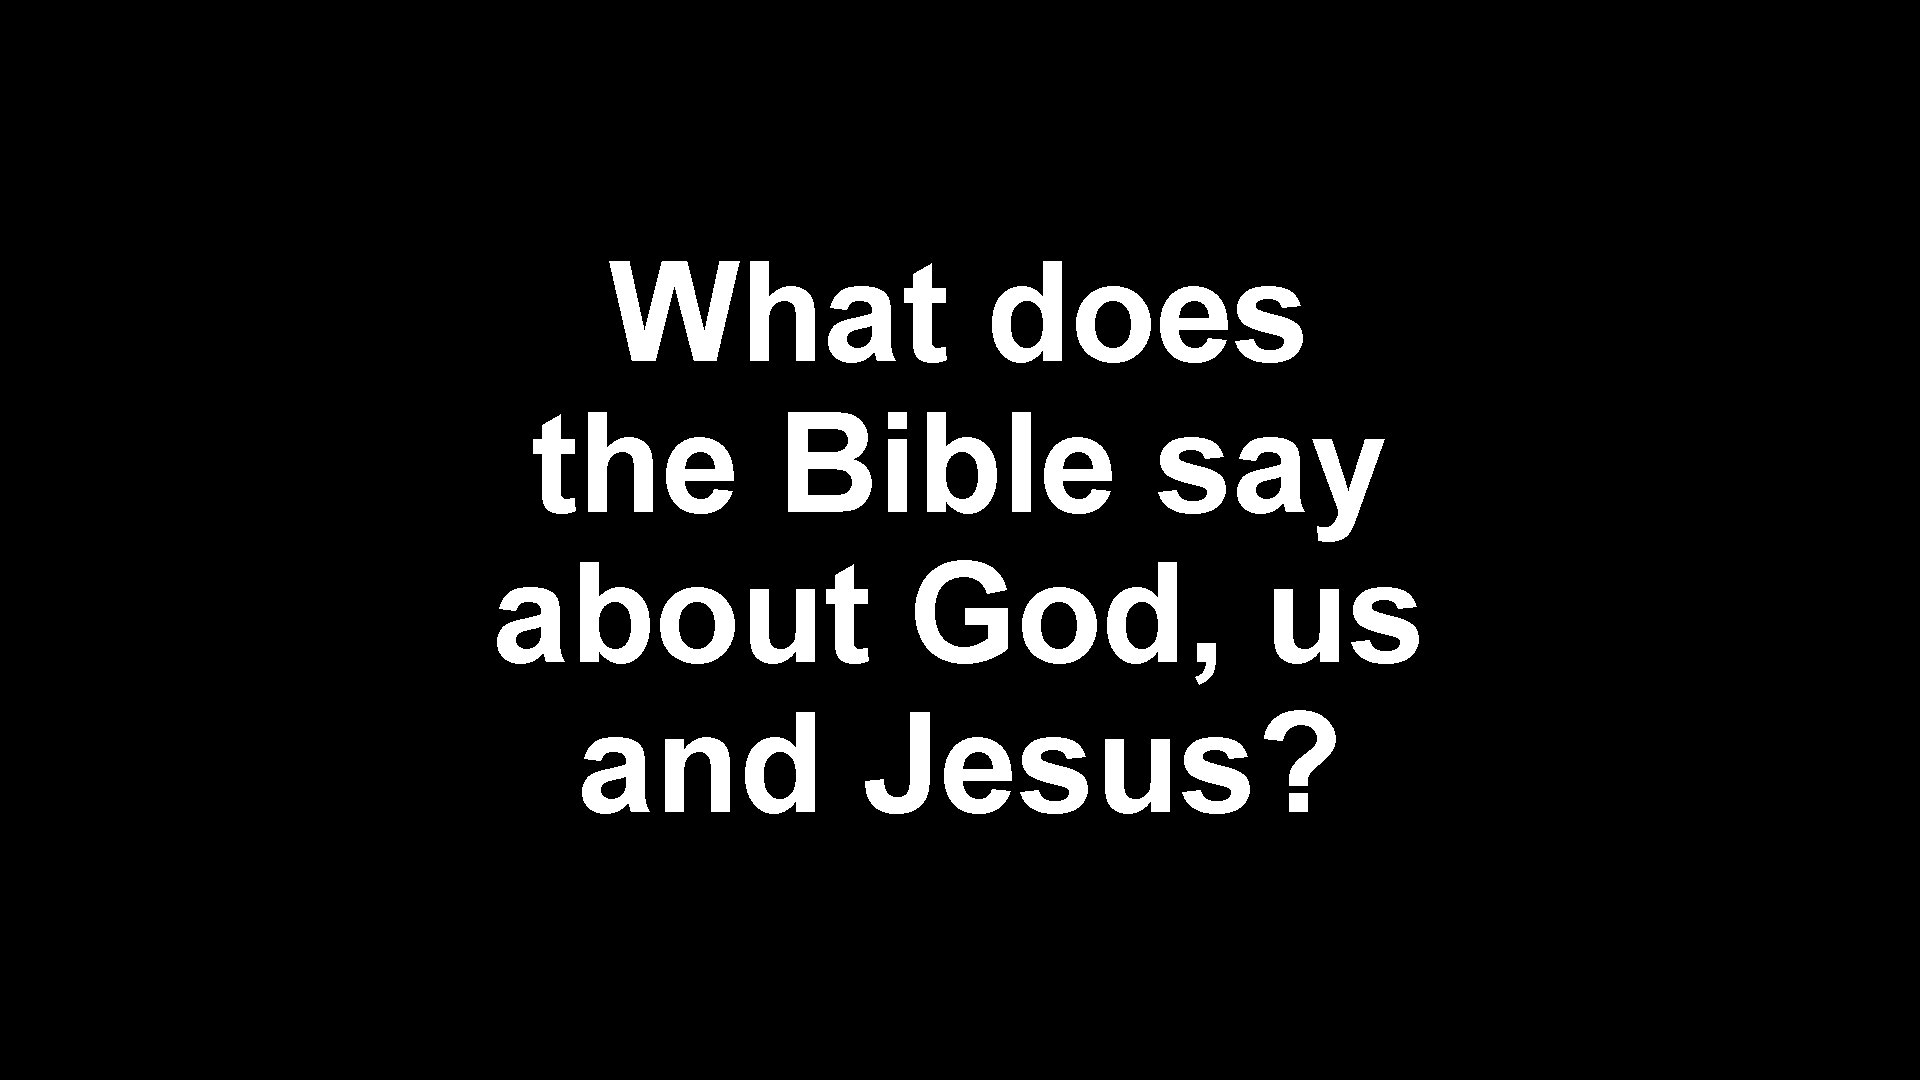 What does the Bible say about God, us and Jesus? 